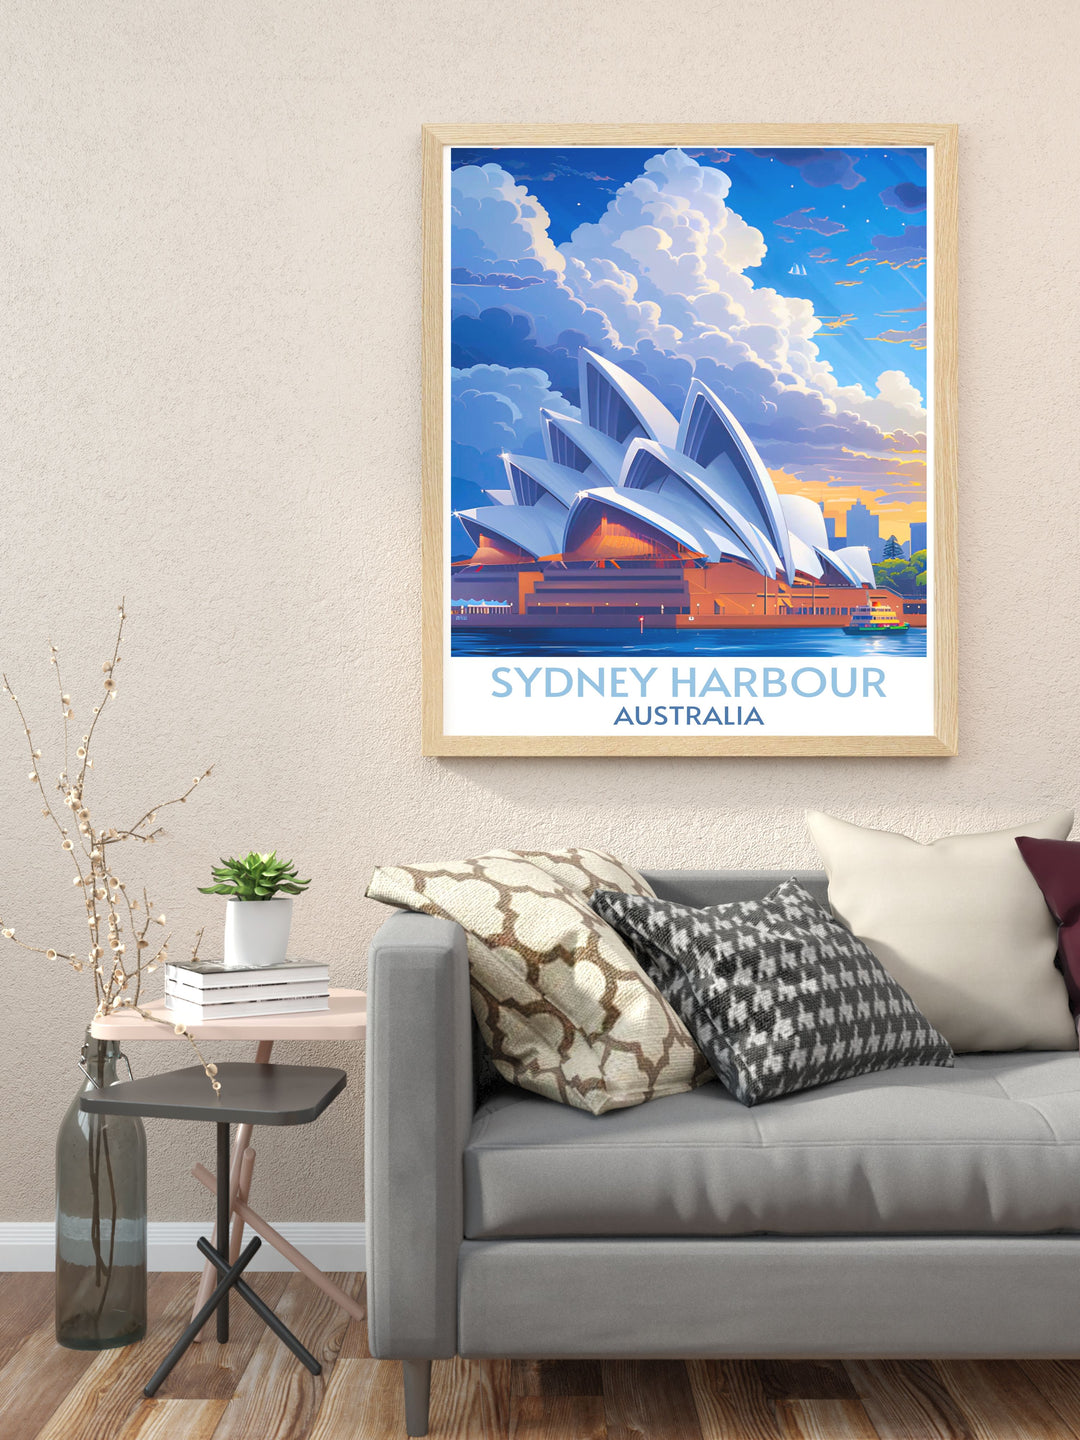 Coastal art print of Bondi Beach, depicting the lively atmosphere and scenic beauty of the famous shoreline, making it a vibrant and eye catching addition to any room decor focused on Australian landscapes.